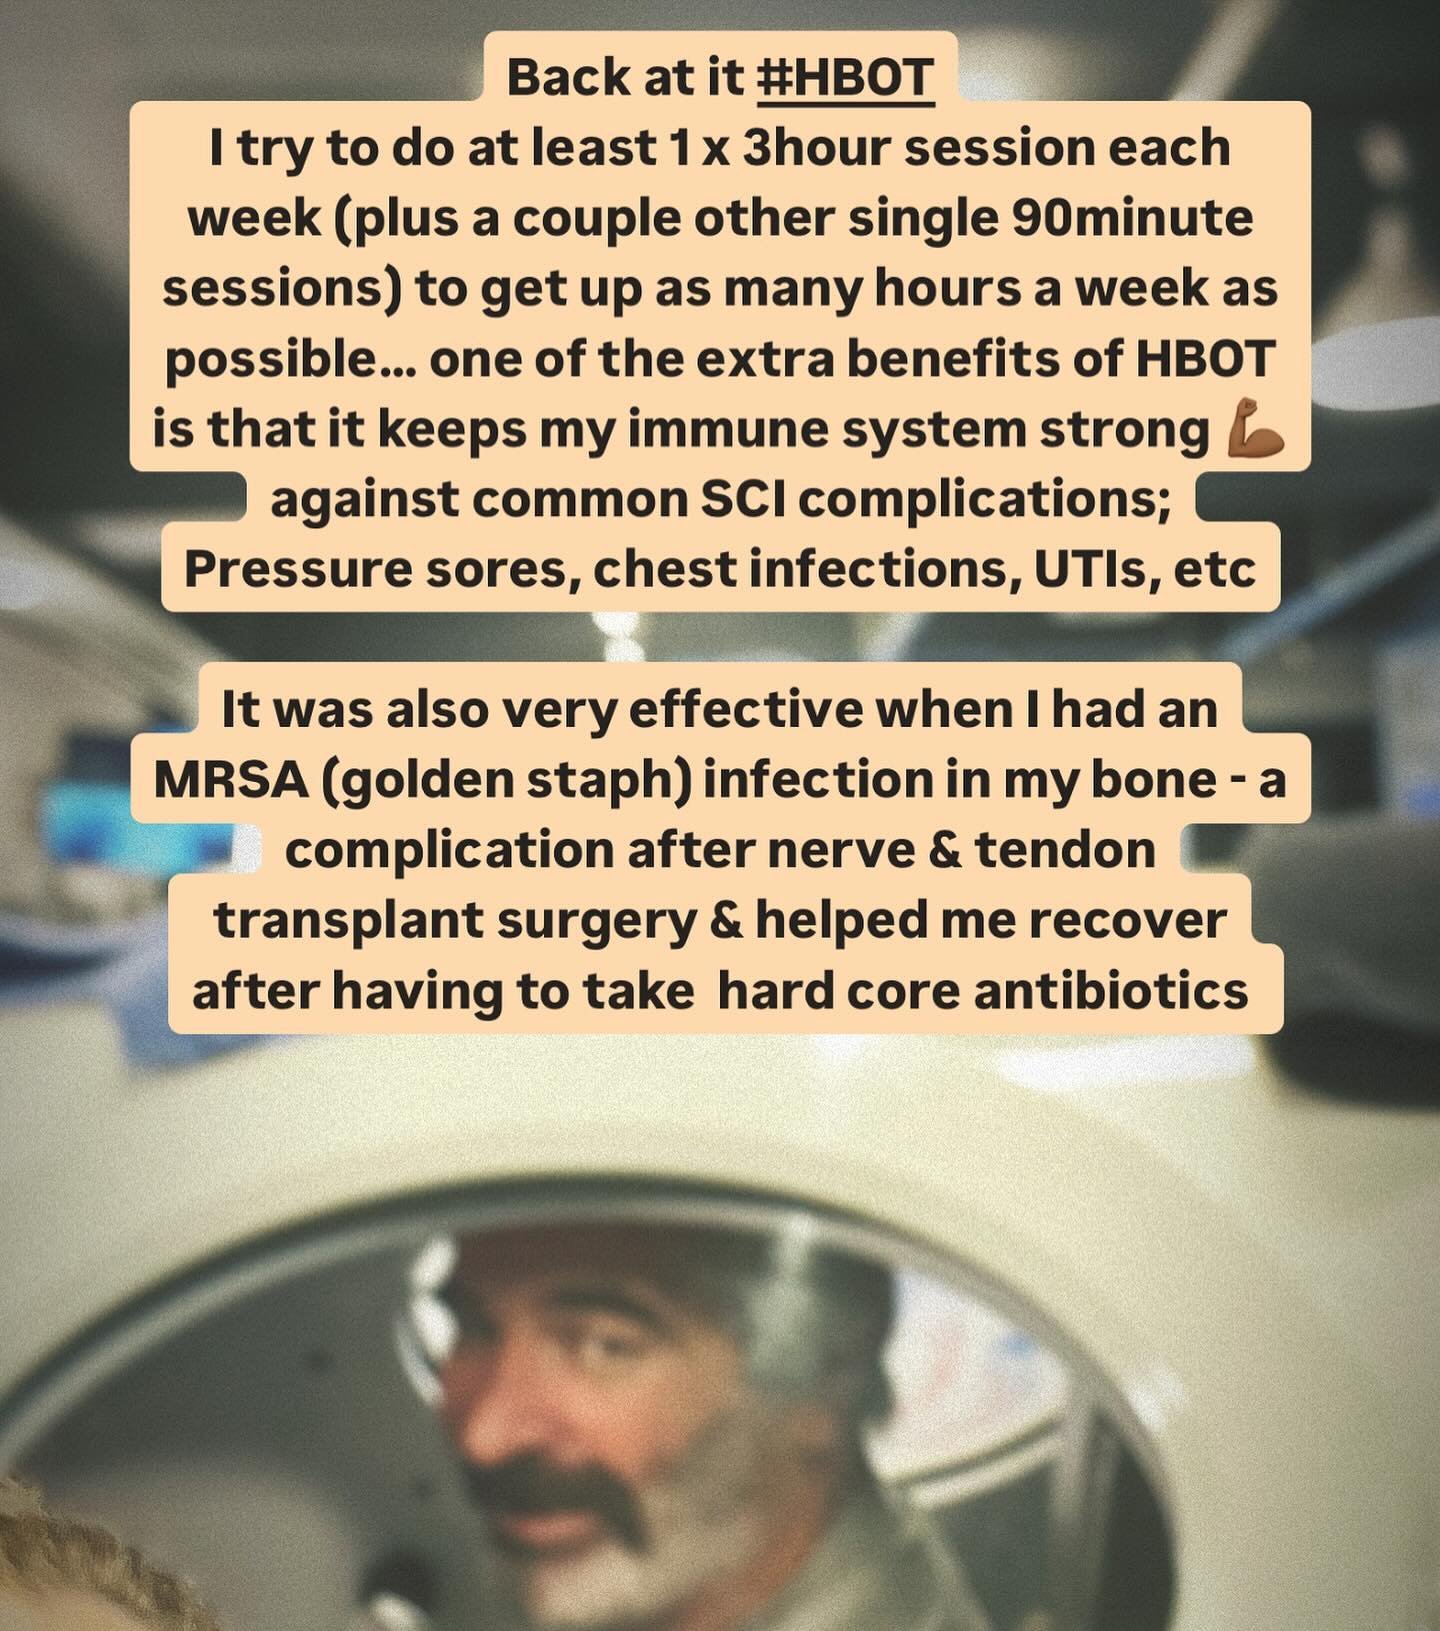 👆🏾Some of the ways HBOT has helped me &hellip; 

👇🏾 More info on on HBOT for other applications; 
Because hyperbaric oxygen therapy helps heals damaged tissue by supporting your immune system, stimulating new stem cells &amp; helping your body gr